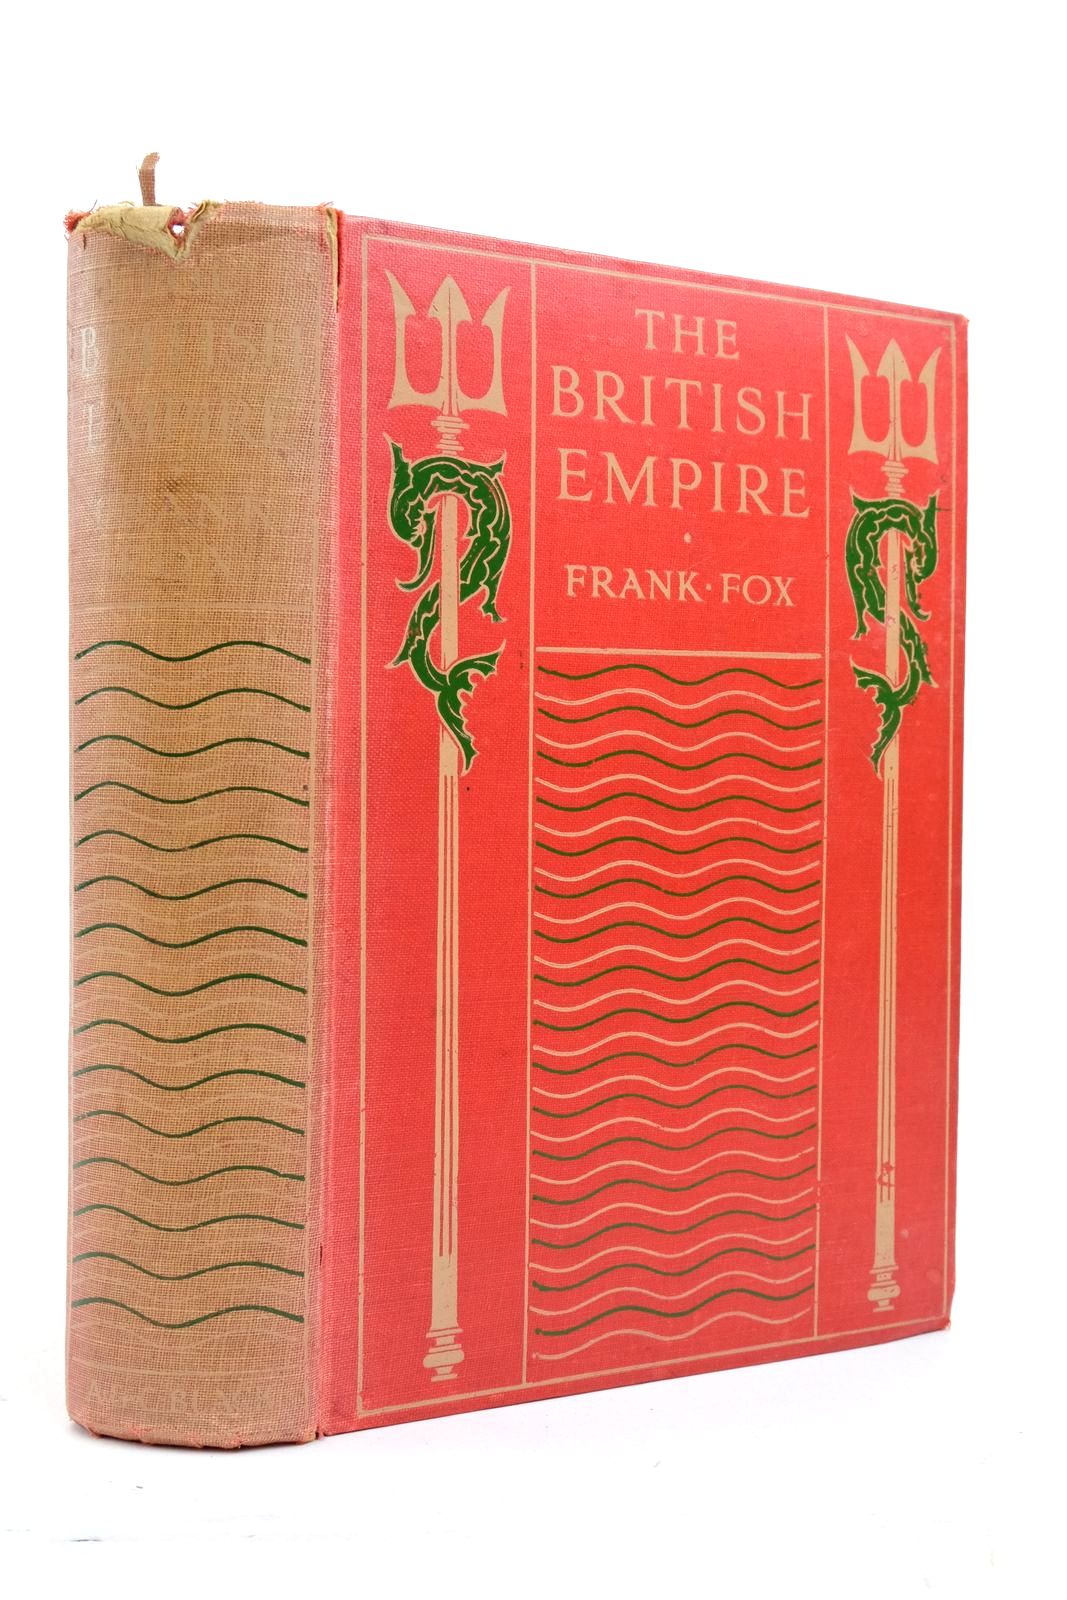 Photo of THE BRITISH EMPIRE written by Fox, Frank published by Adam & Charles Black (STOCK CODE: 2137556)  for sale by Stella & Rose's Books